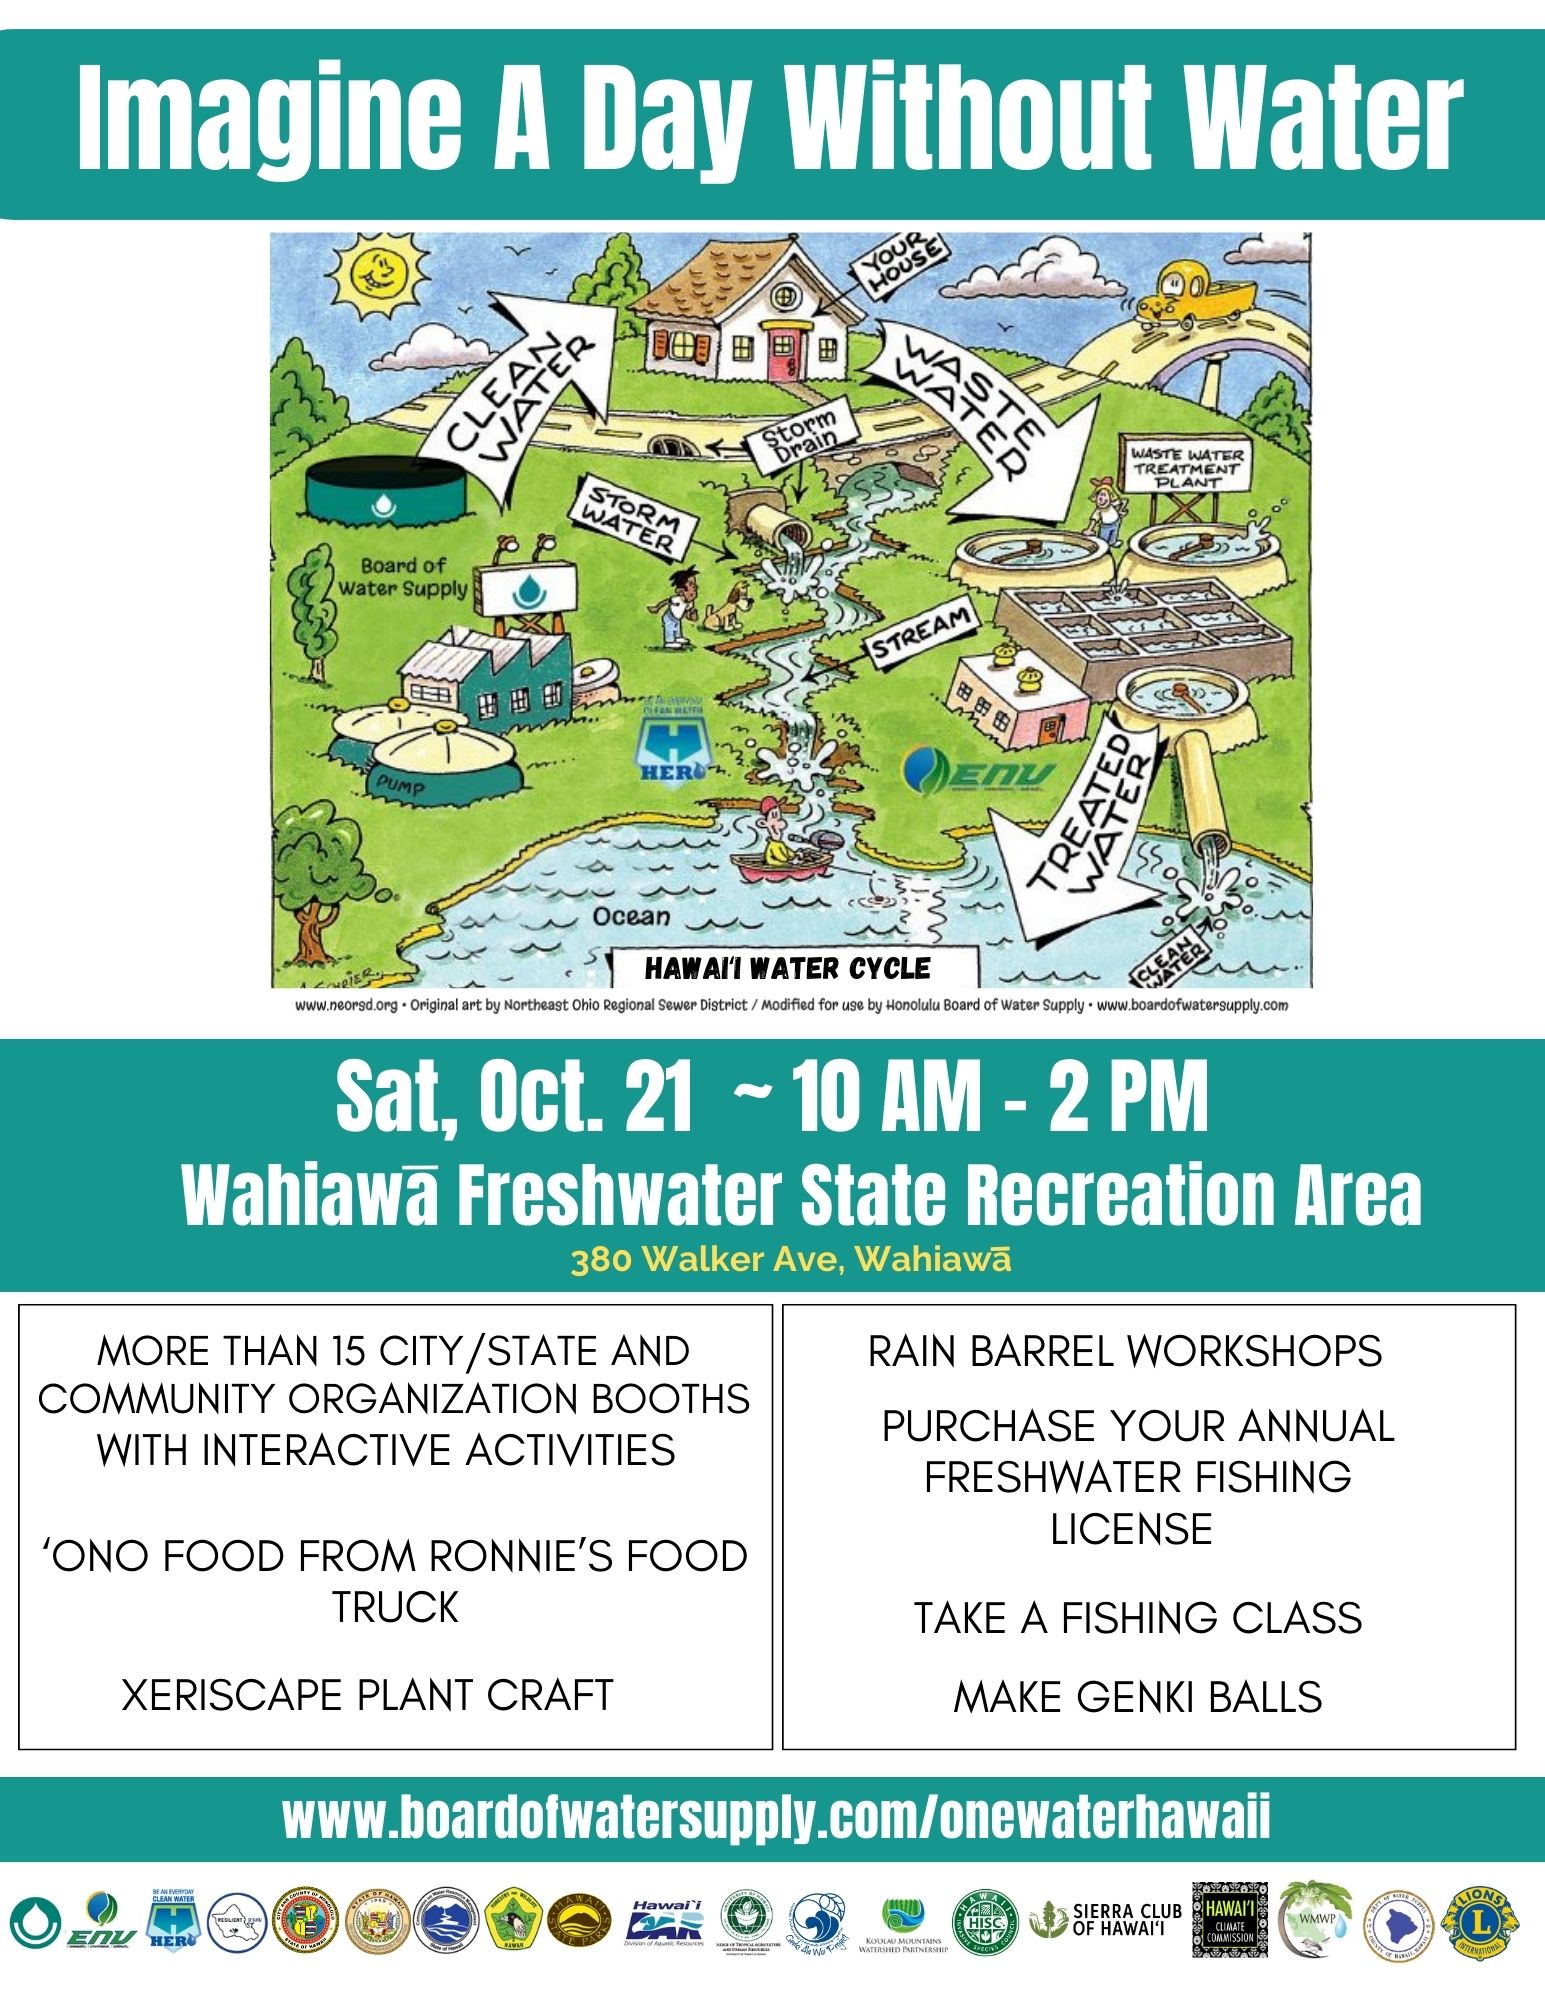 imagine a day without water event at the Freshwater State Recreation Area